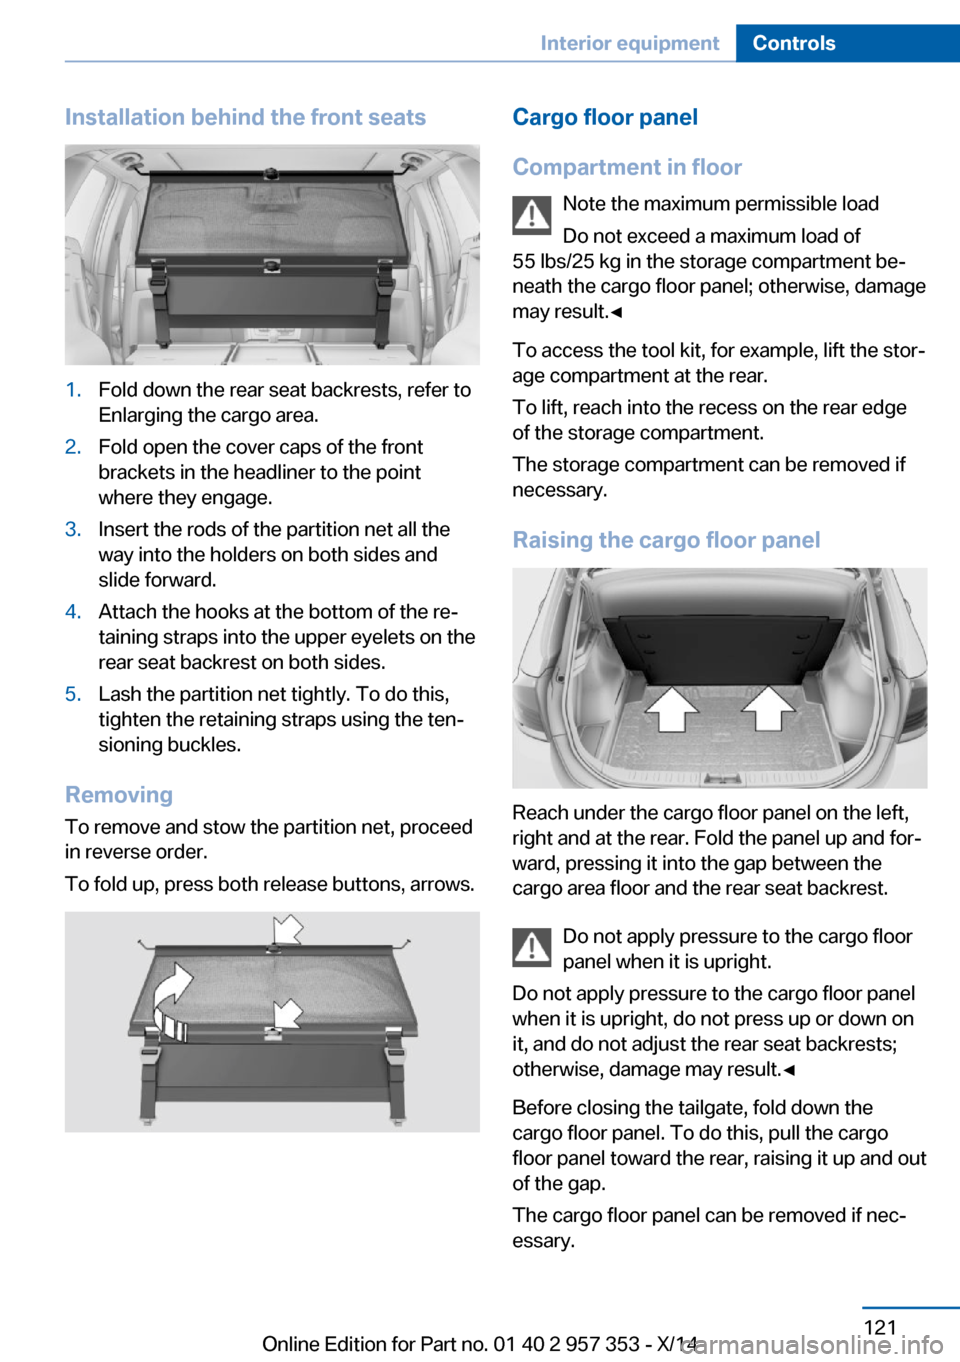 BMW X1 2014 E84 Owners Guide Installation behind the front seats1.Fold down the rear seat backrests, refer to
Enlarging the cargo area.2.Fold open the cover caps of the front
brackets in the headliner to the point
where they enga